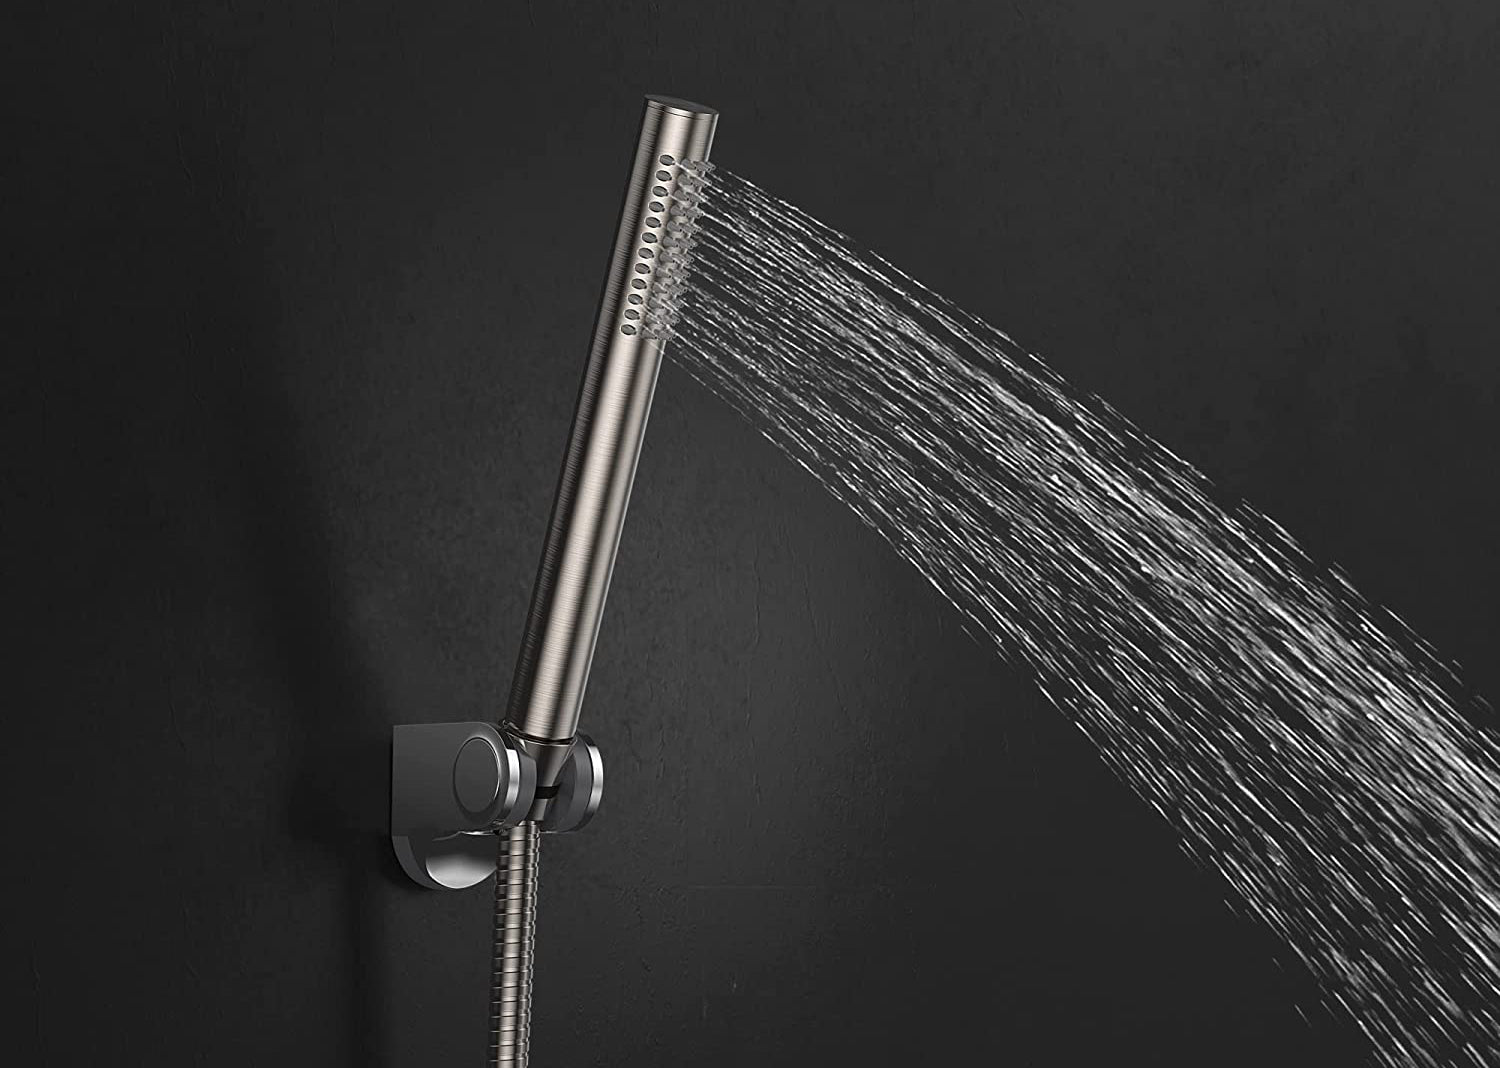 High-pressure shower heads vs. low-flow shower heads: Which is better for you?